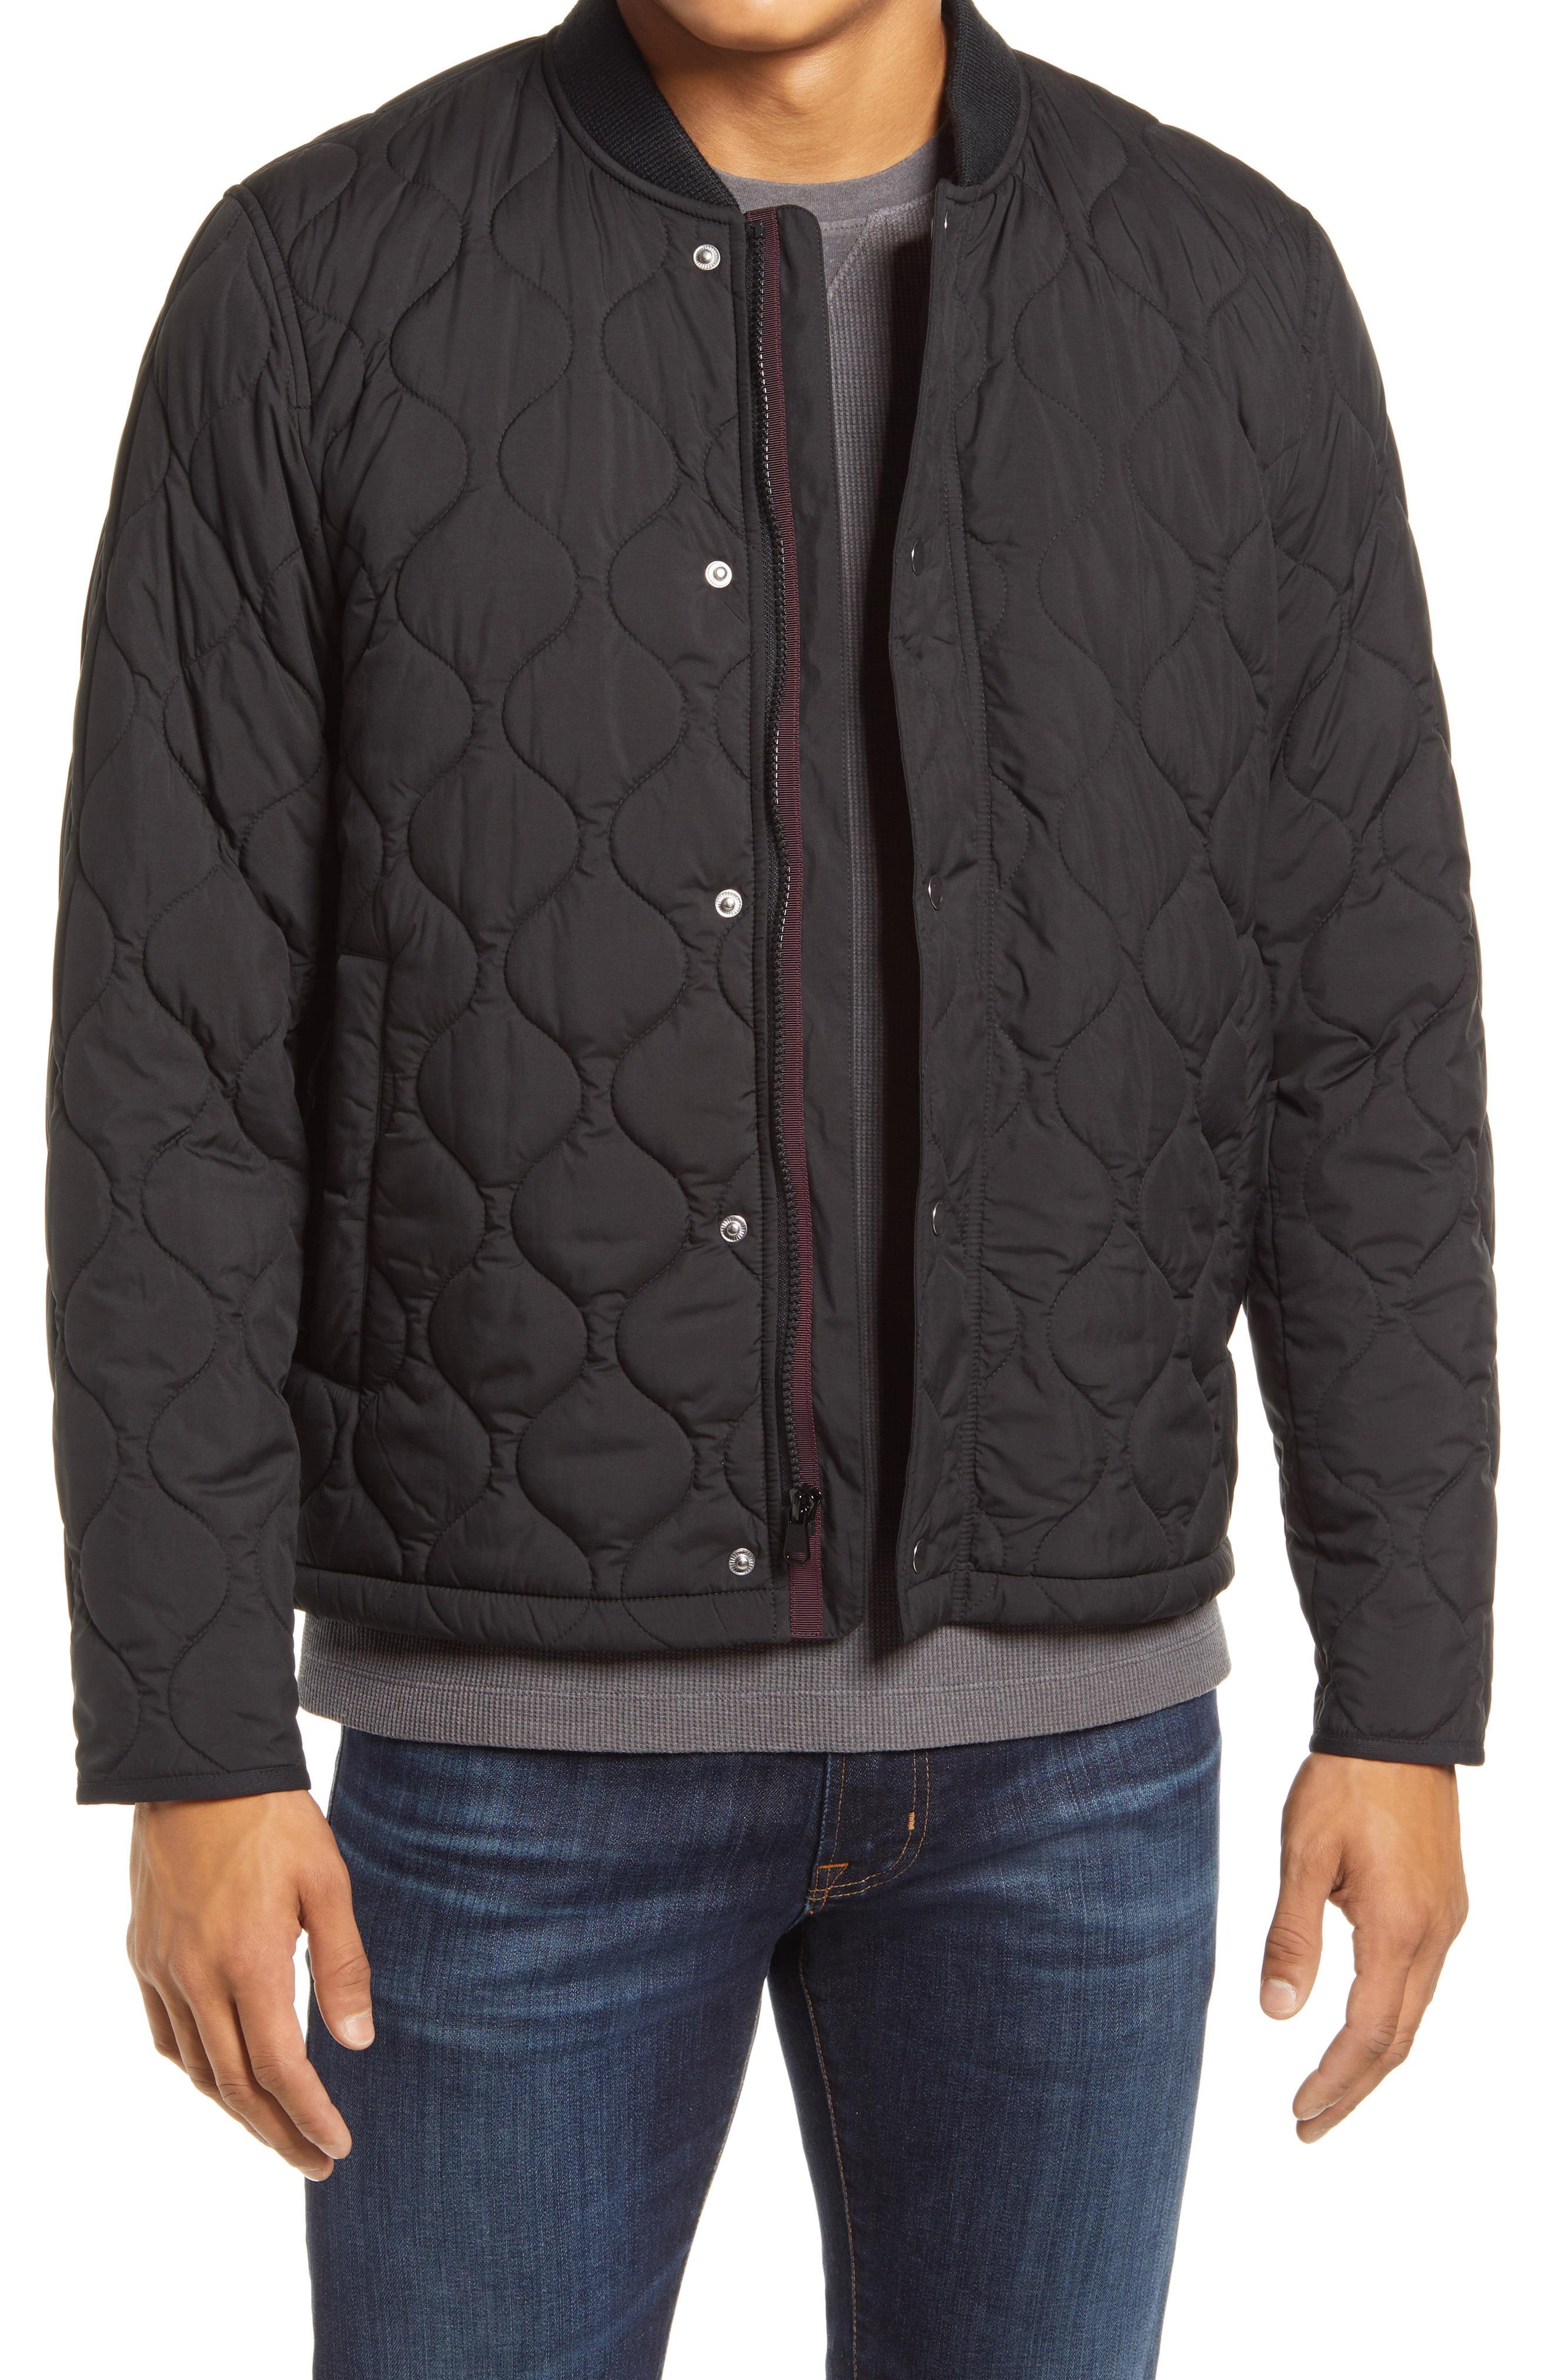 Bonobos The Quilted Bomber Jacket in Black for Men - Lyst